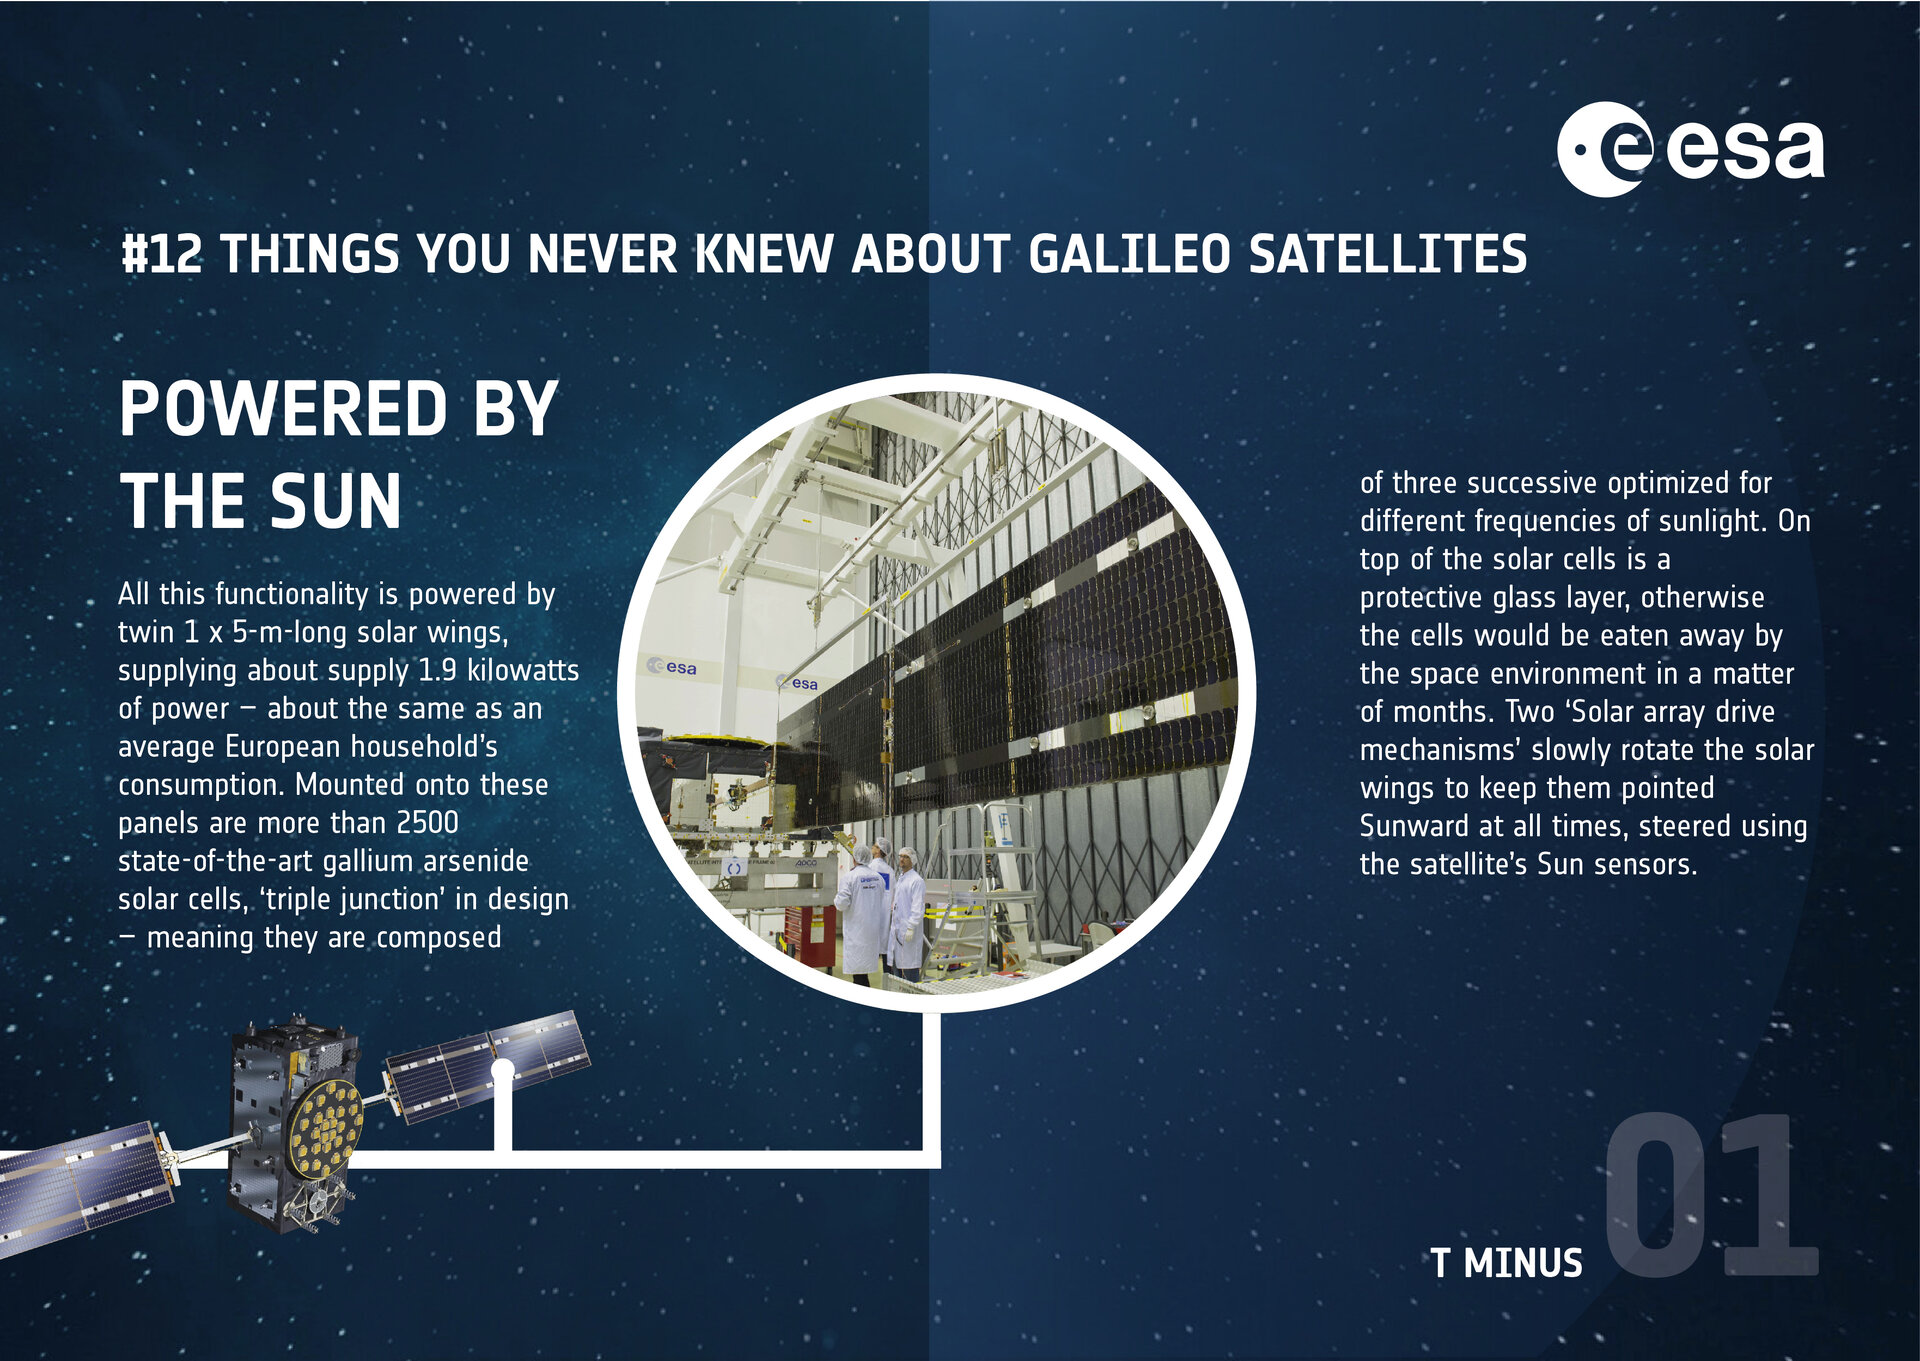 Galileo infographic: 'Powered by the Sun'